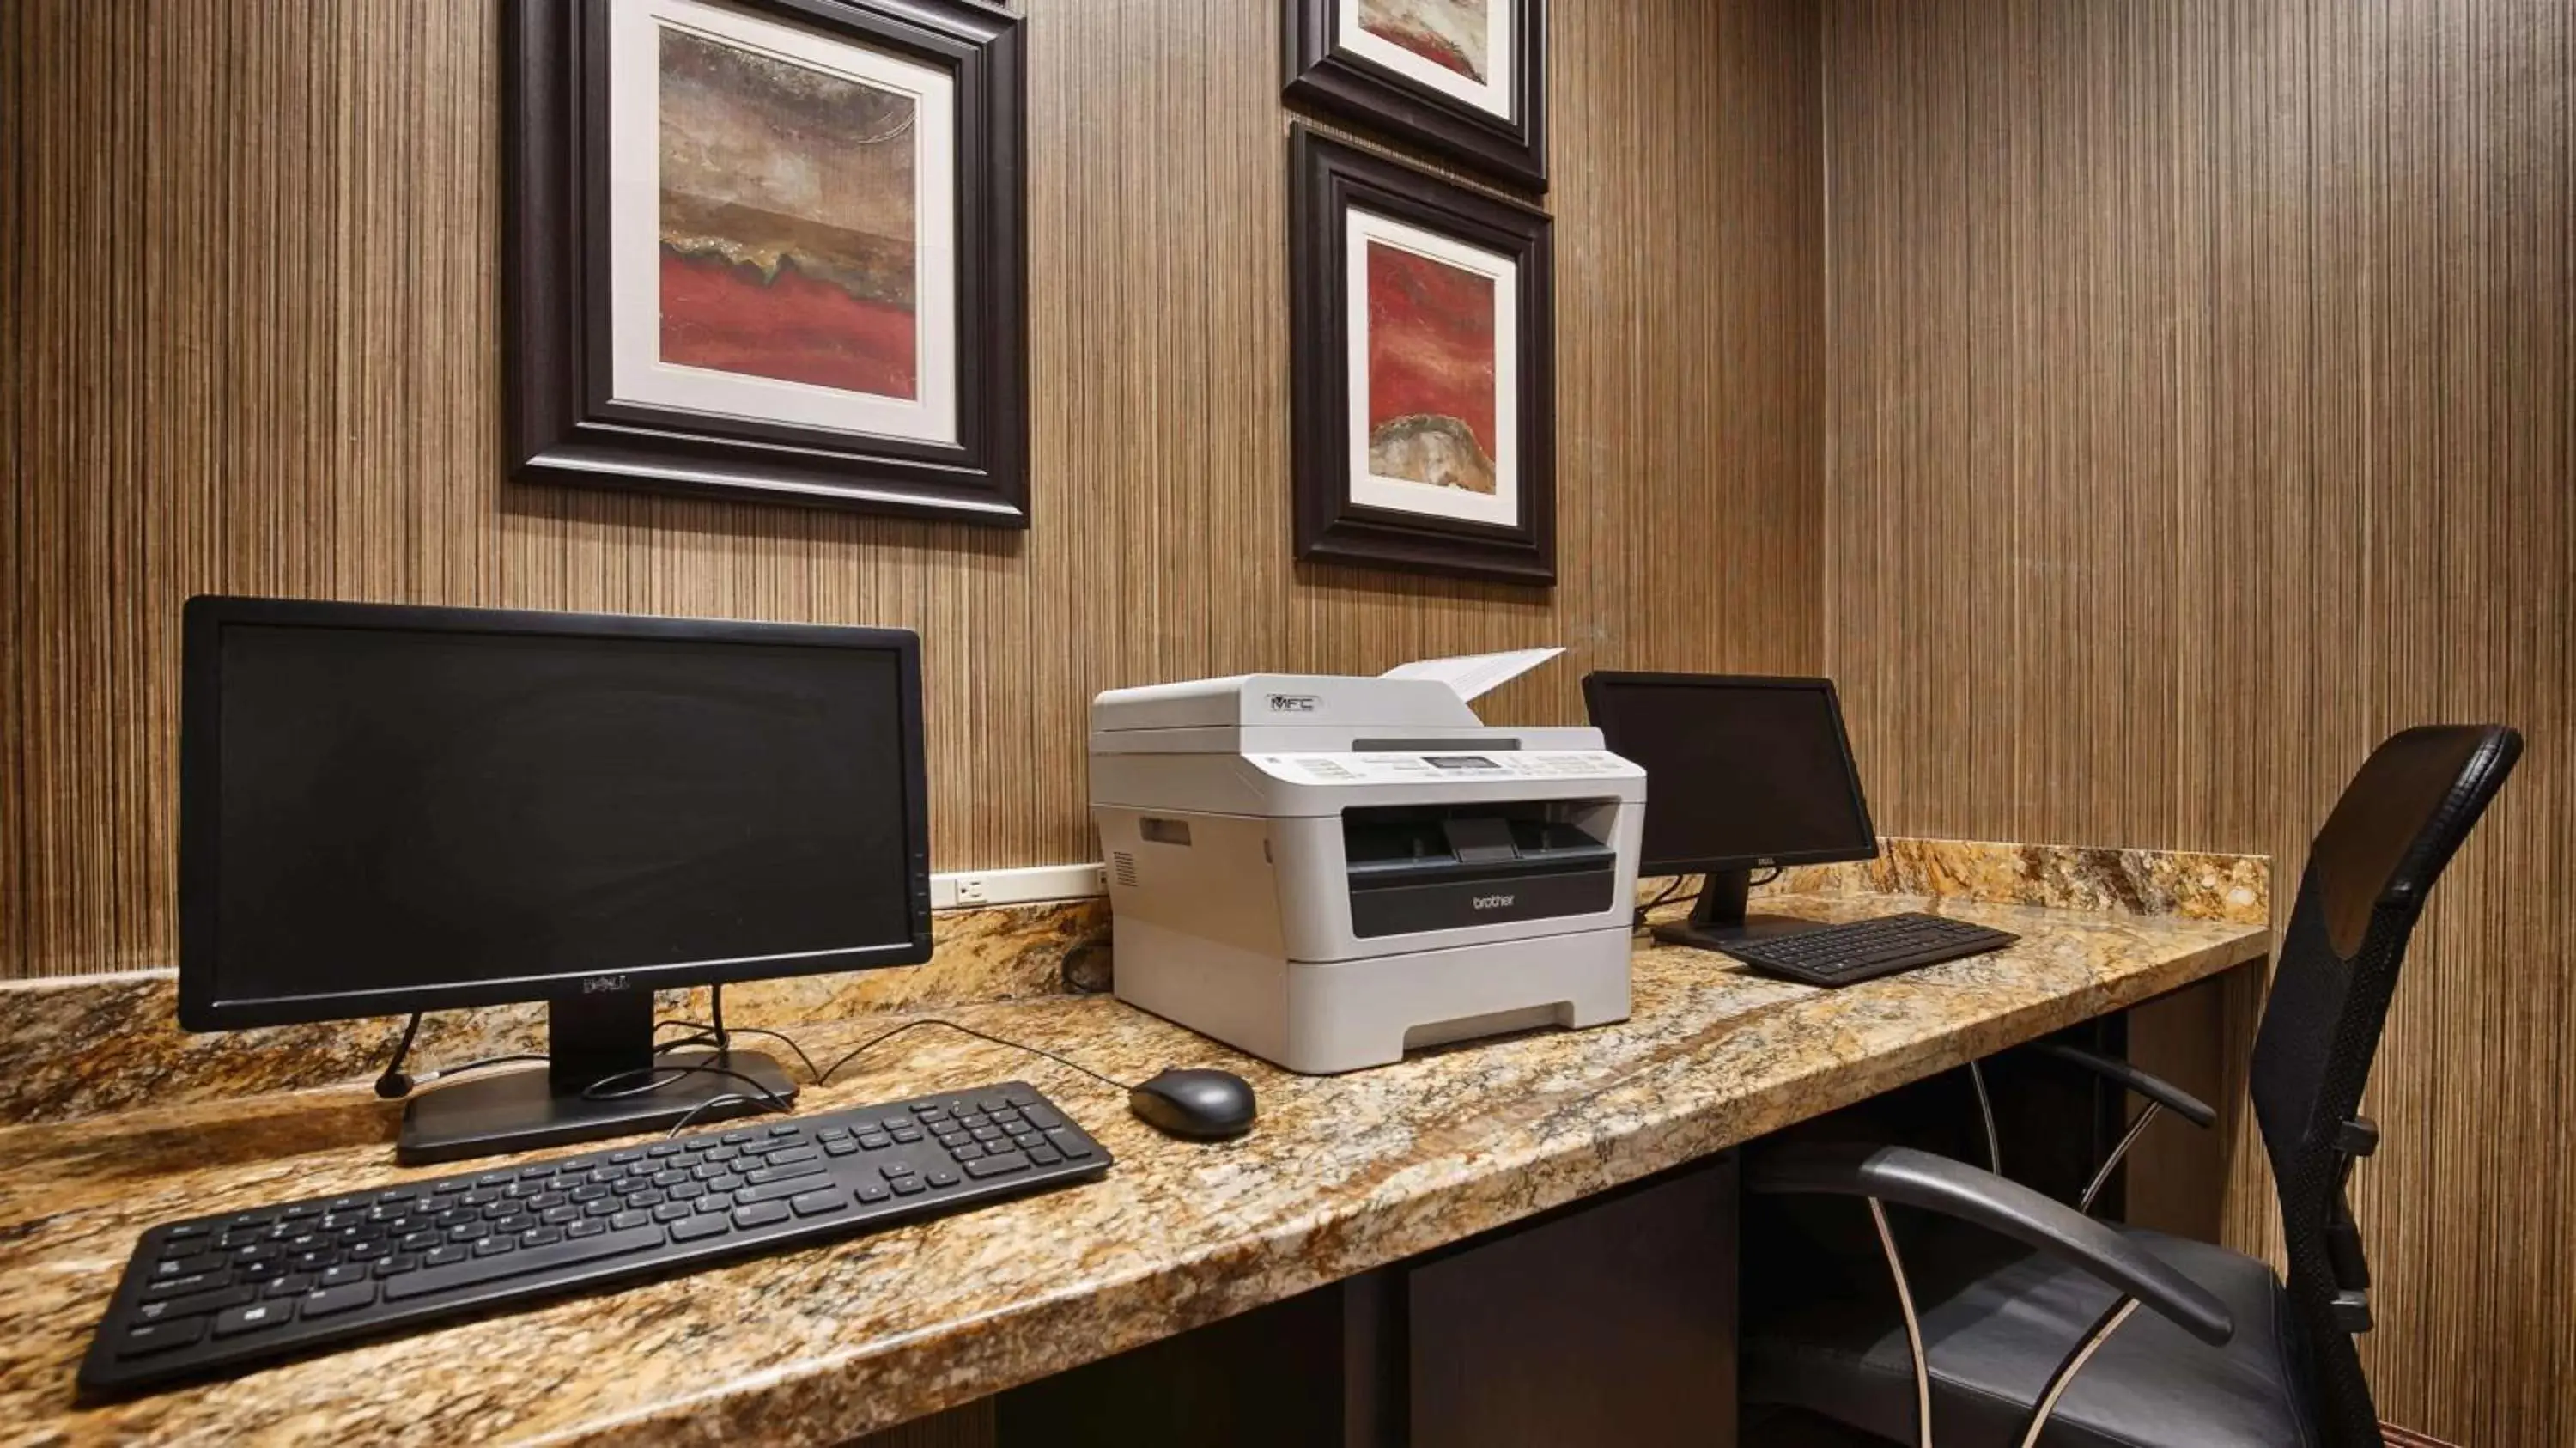 On site in Best Western PLUS Hobby Airport Inn and Suites